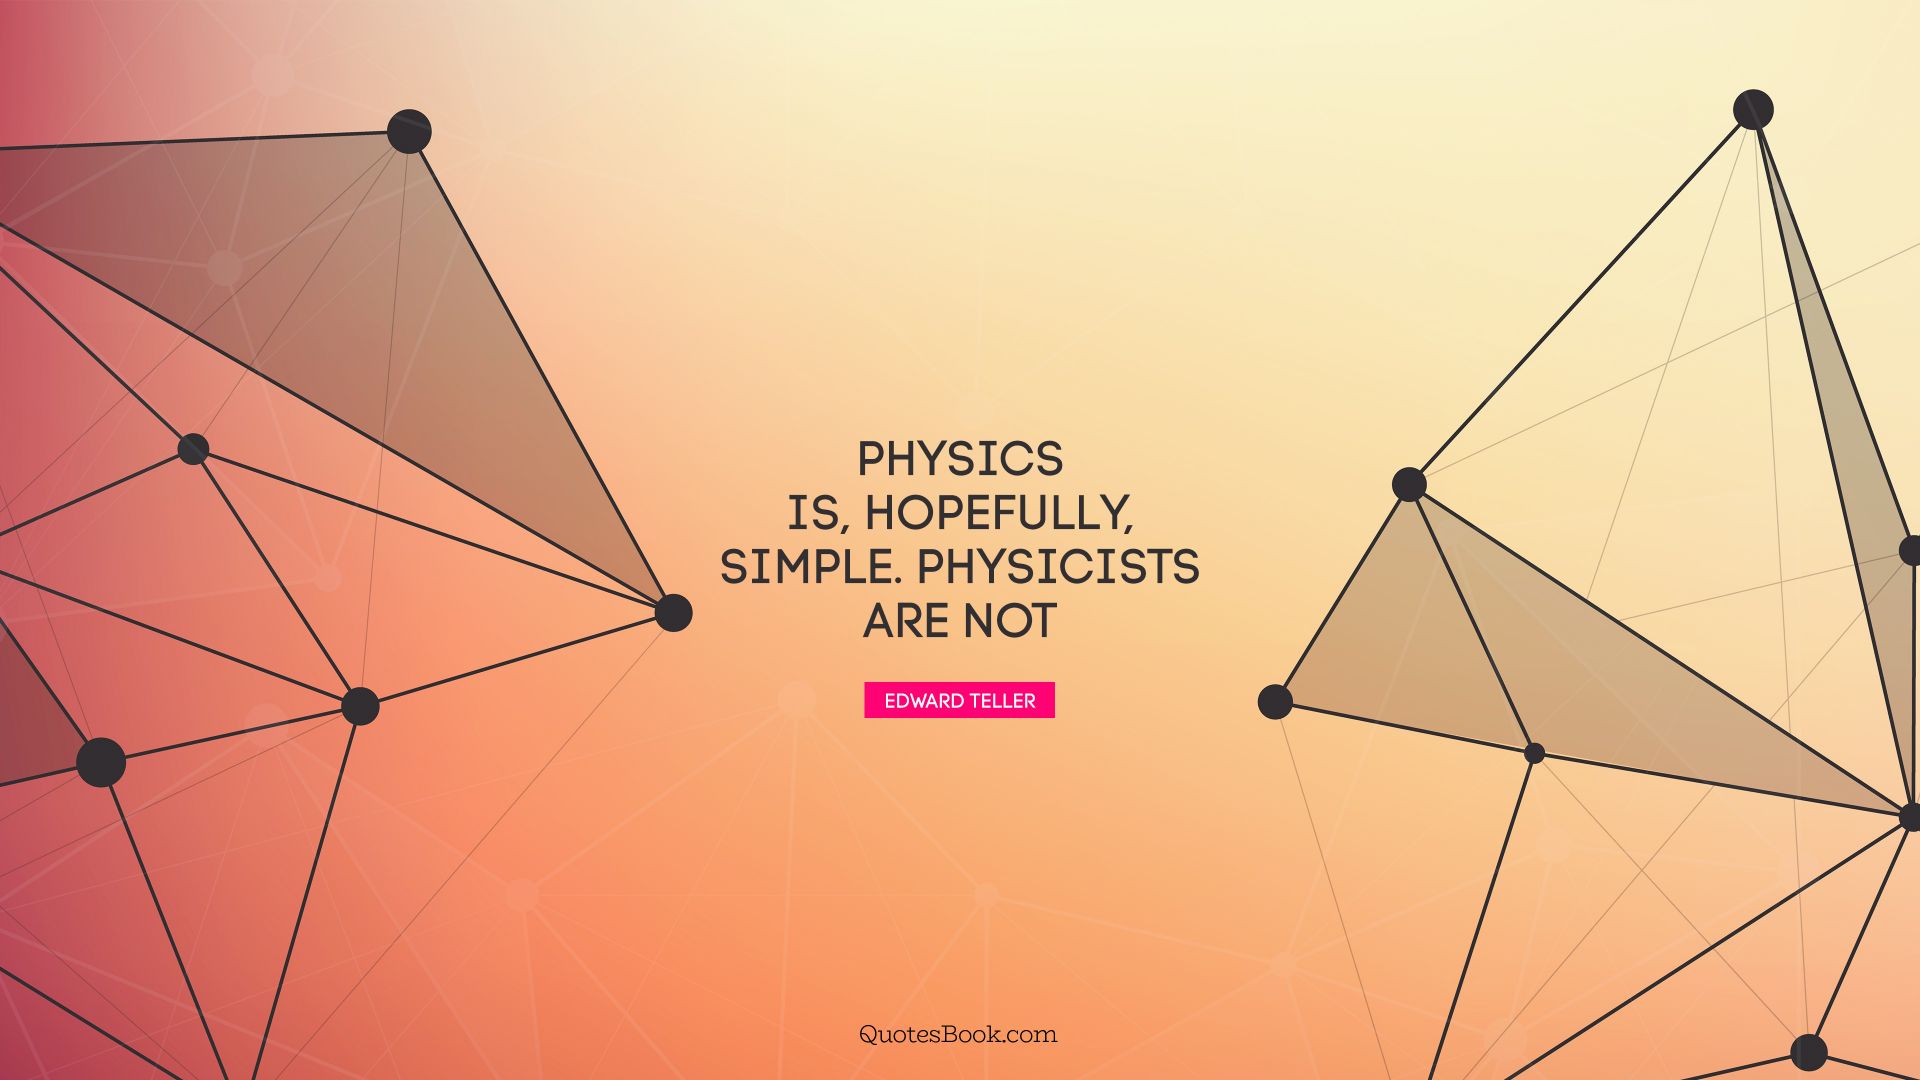 Physics is, hopefully, simple. Physicists are not. - Quote by Edward Teller